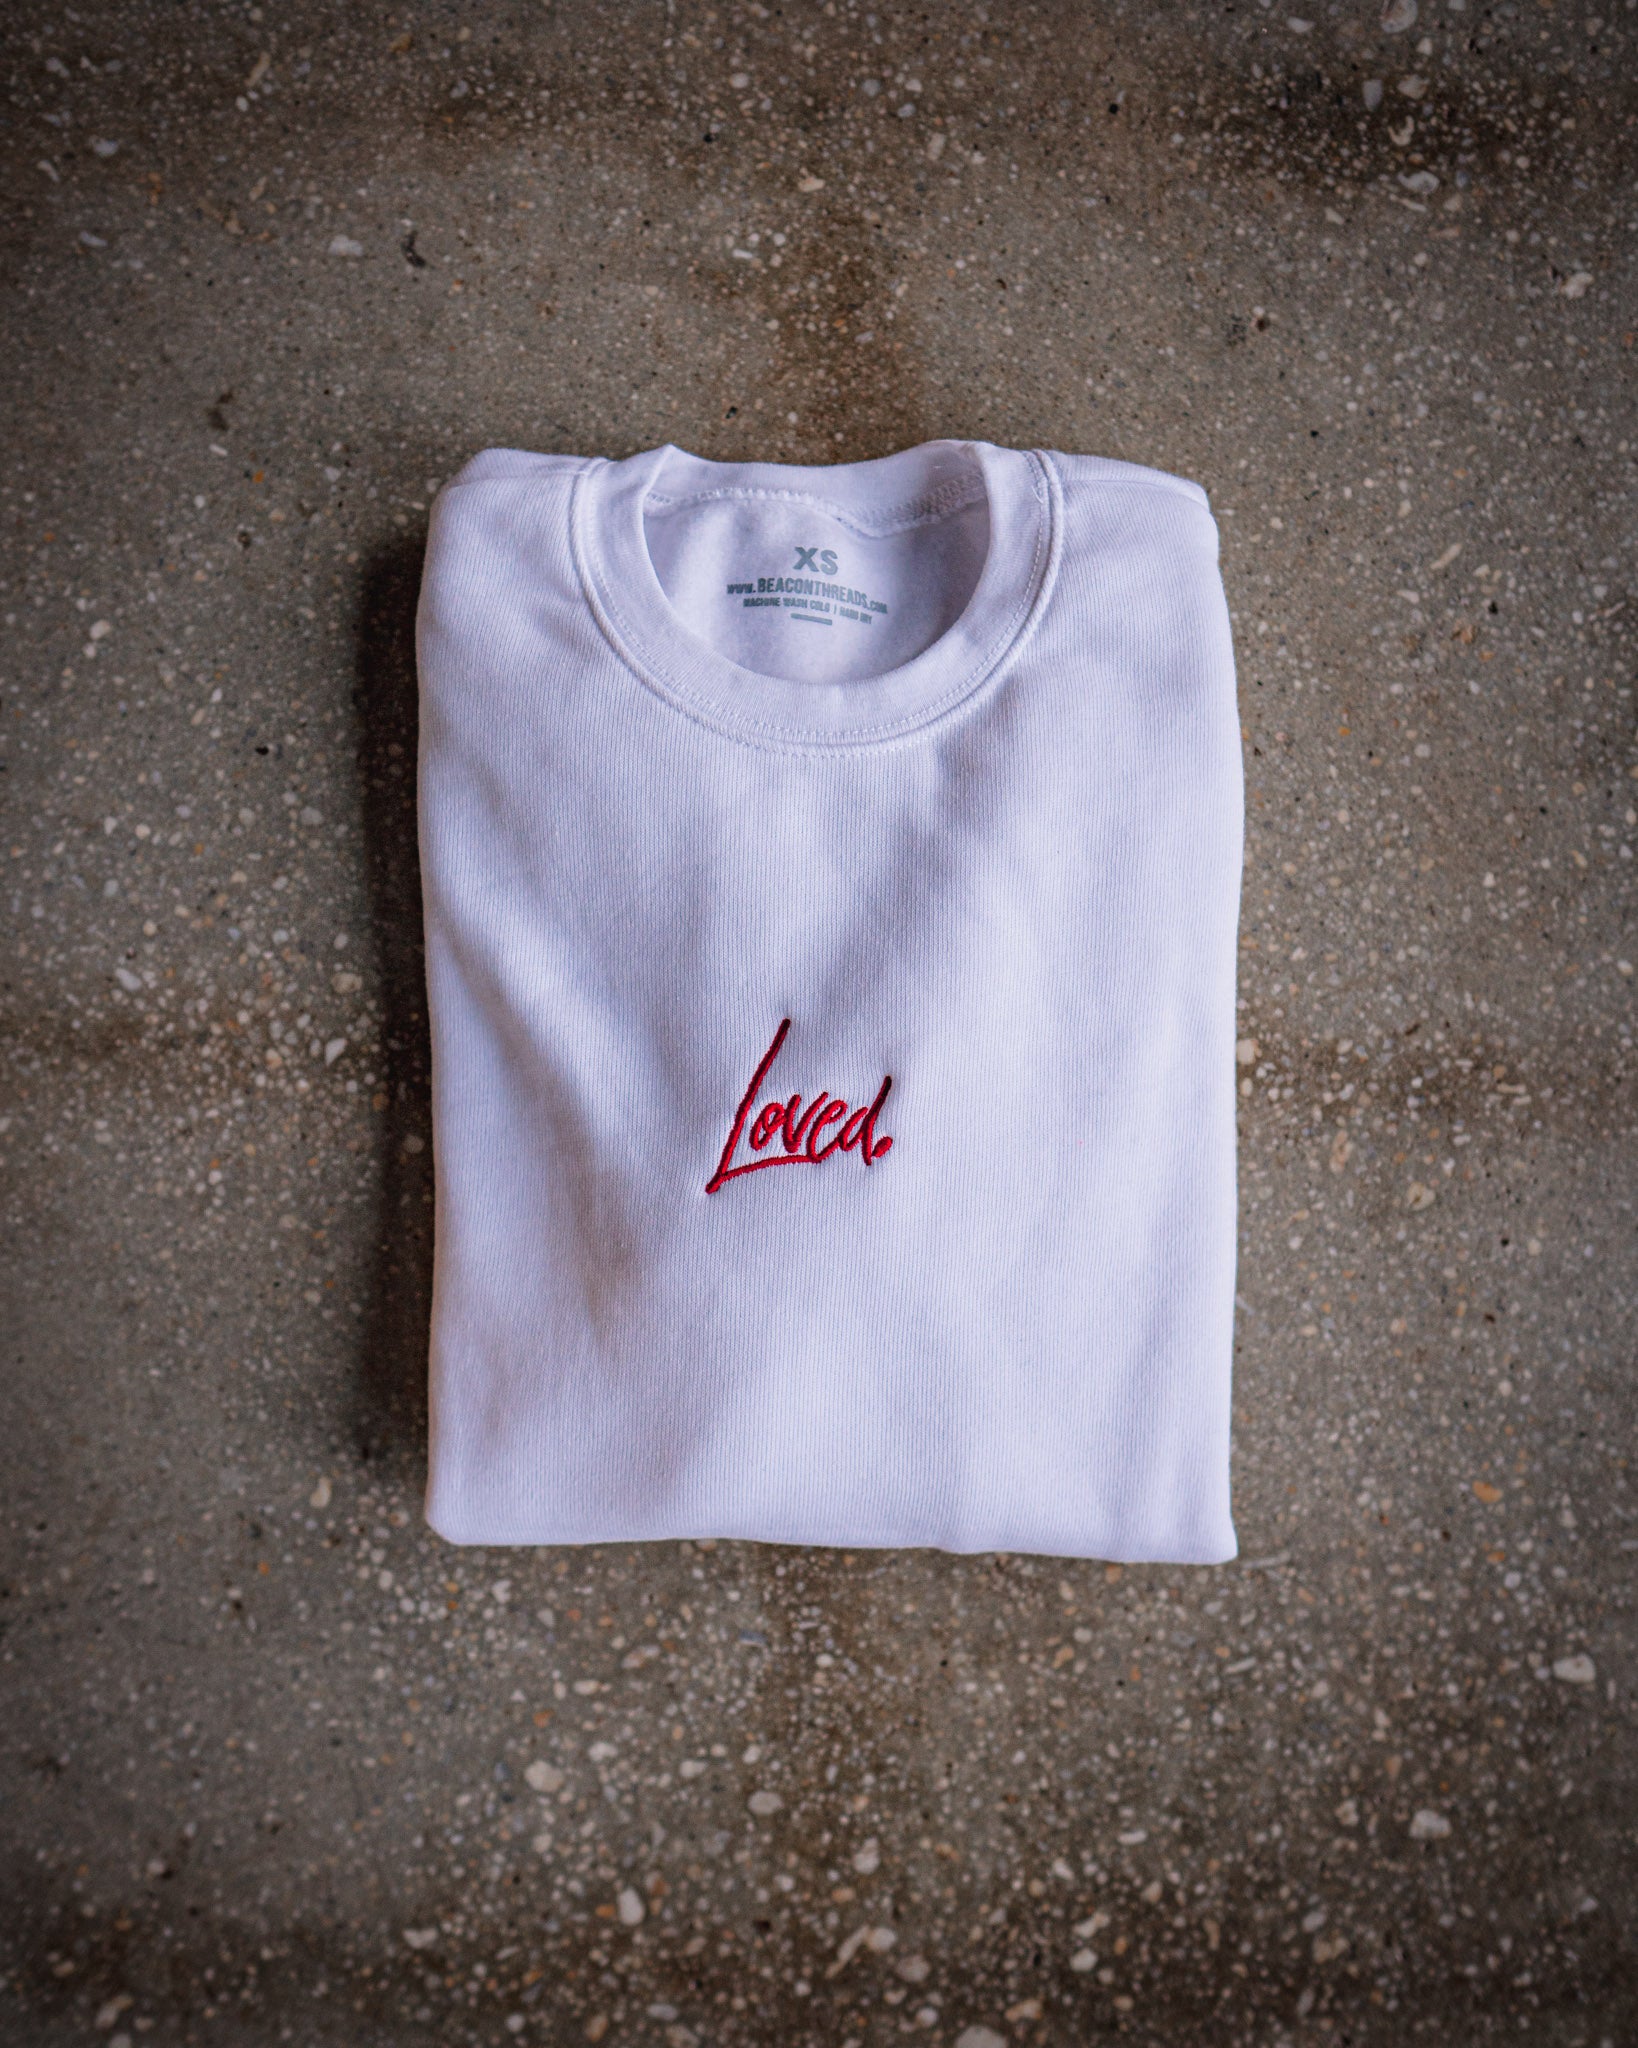 LOVED. – Beacon Threads